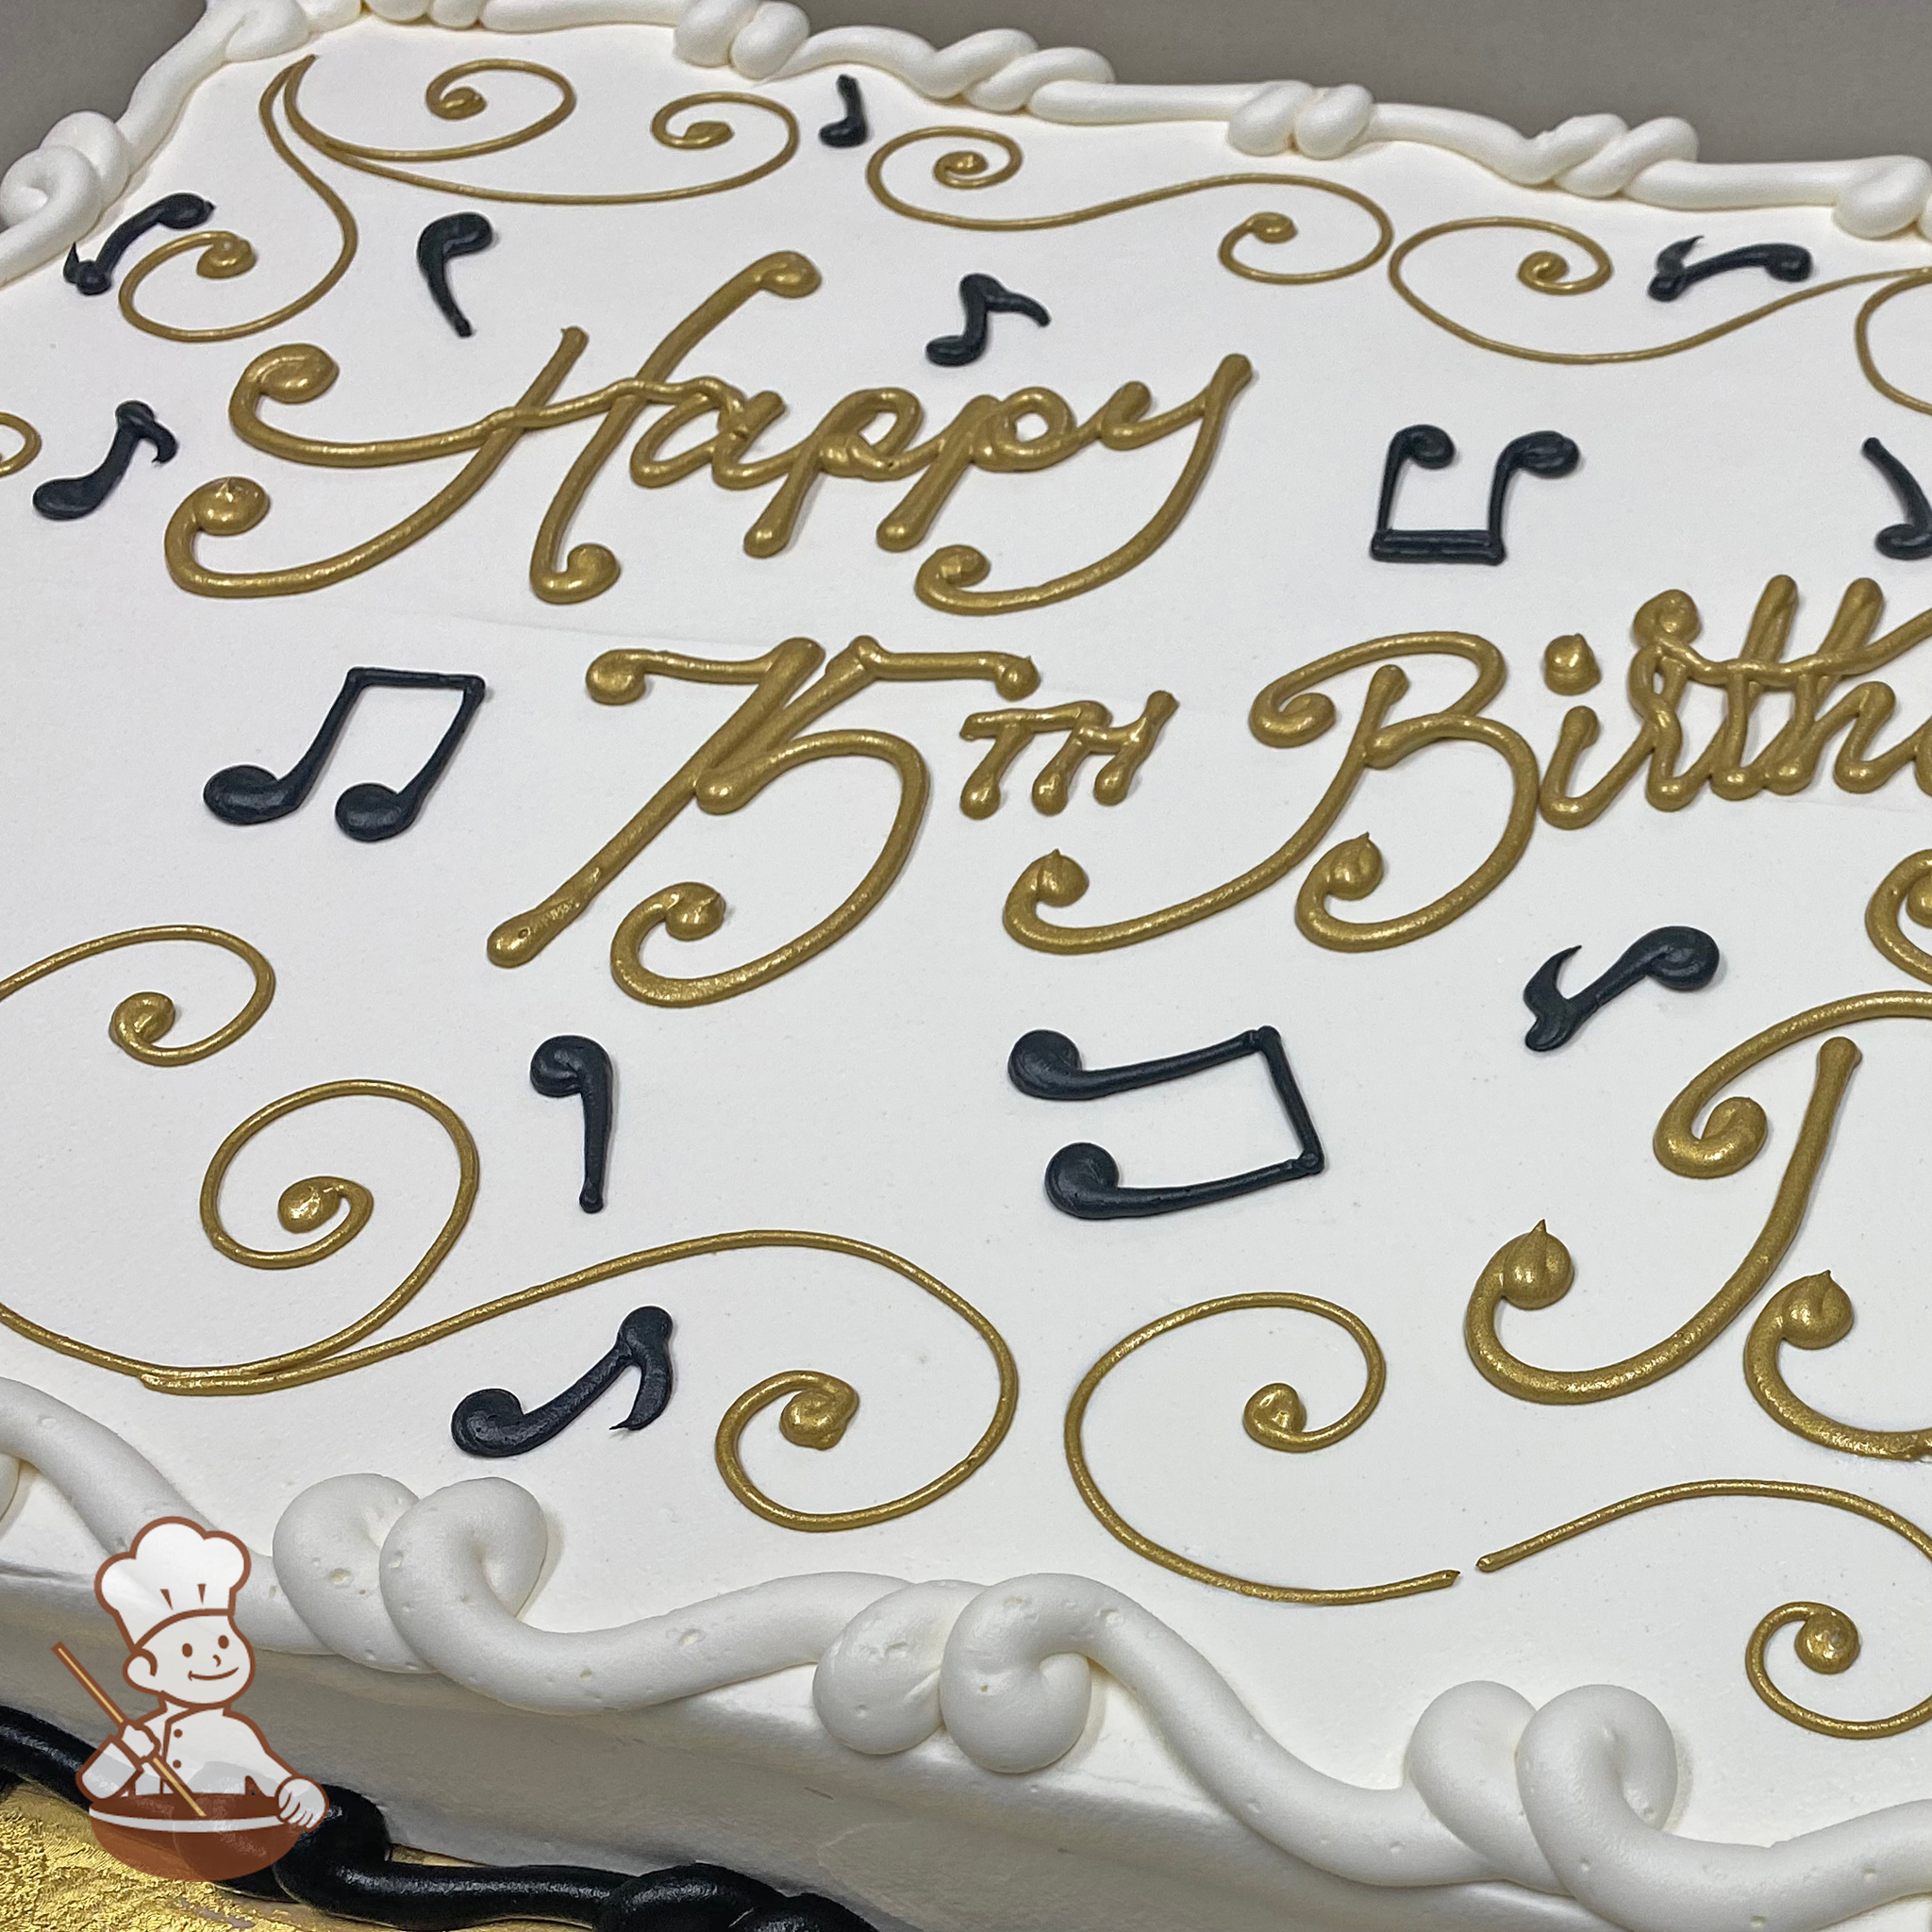 Musical Theme Cake - Cakes and Bakes Stories